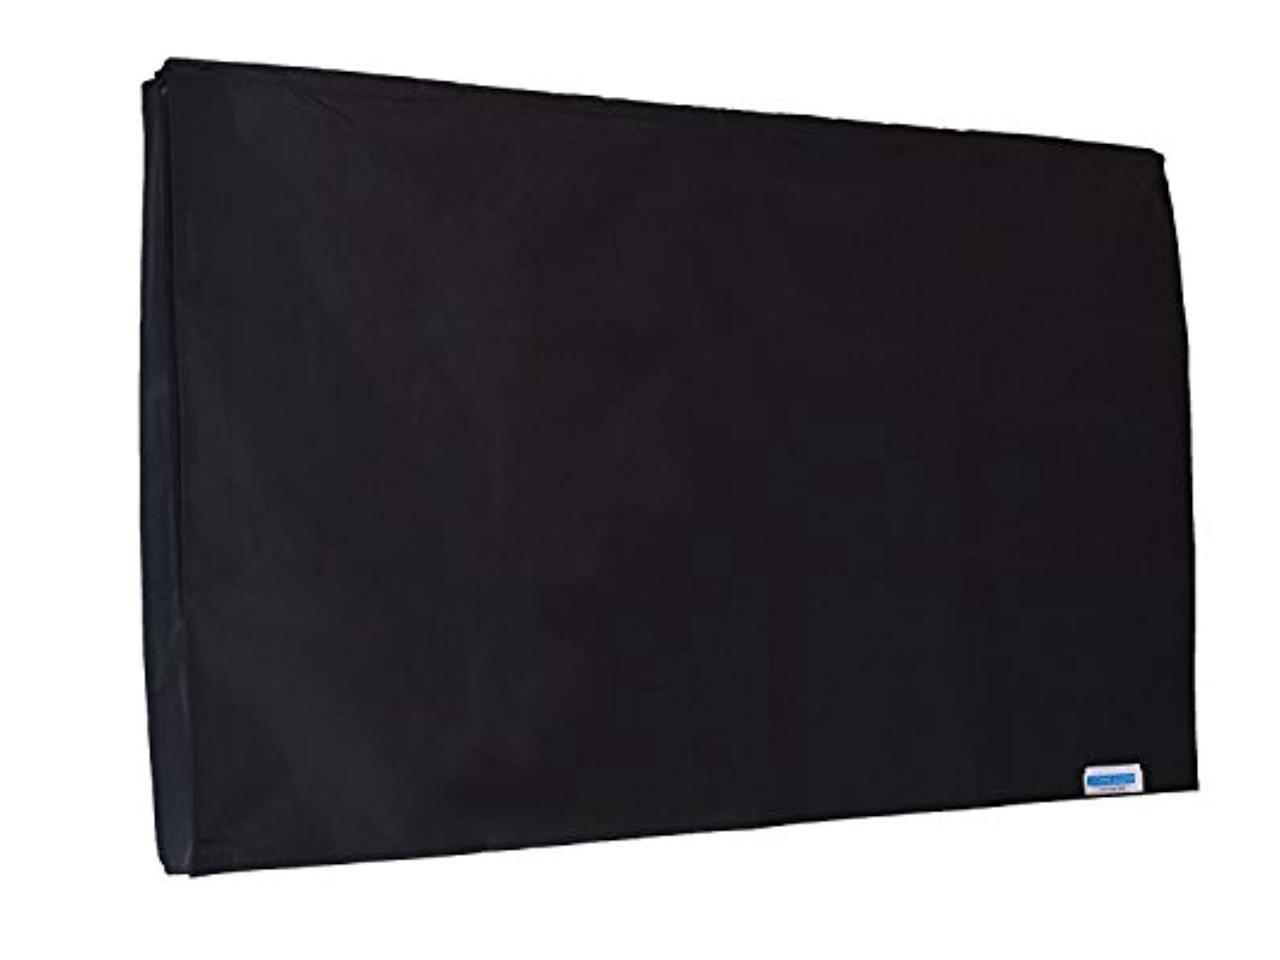 Outdoor Waterproof and Heavy Duty COVER by Comp Bind Technology,Maximize TV Life Cover Dimensions 29W x 3D x 17H Comp Bind Technology Black TV COVER for SAMSUNG UN32J5003AFXZA 32 LED TV 